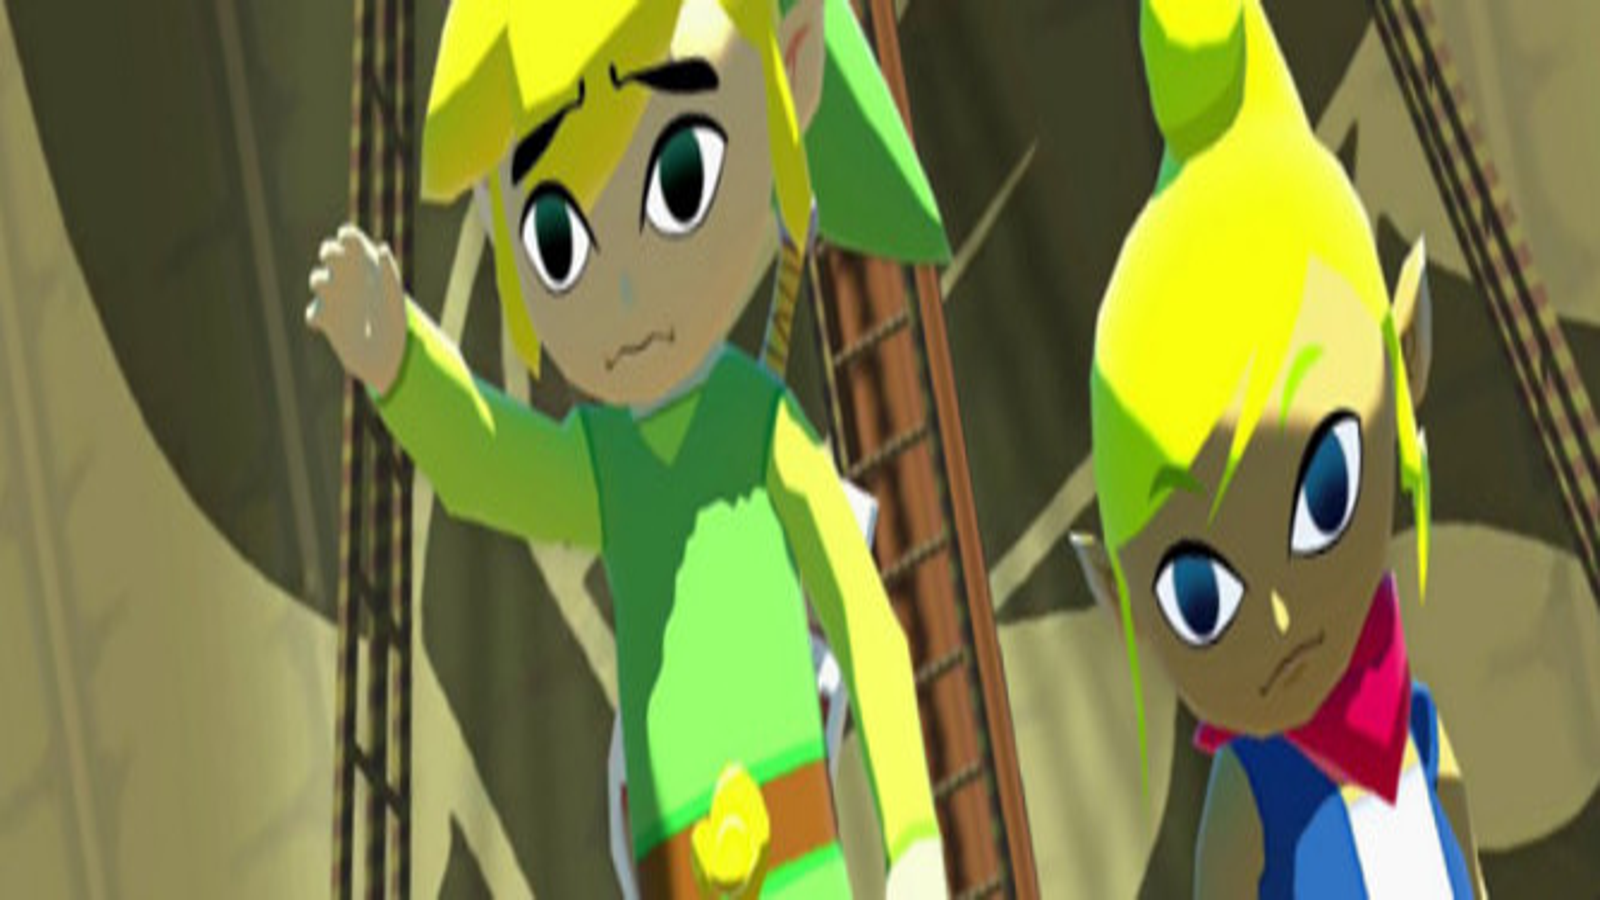 Wind Waker HD Sets Sail for North America on October 4 - News